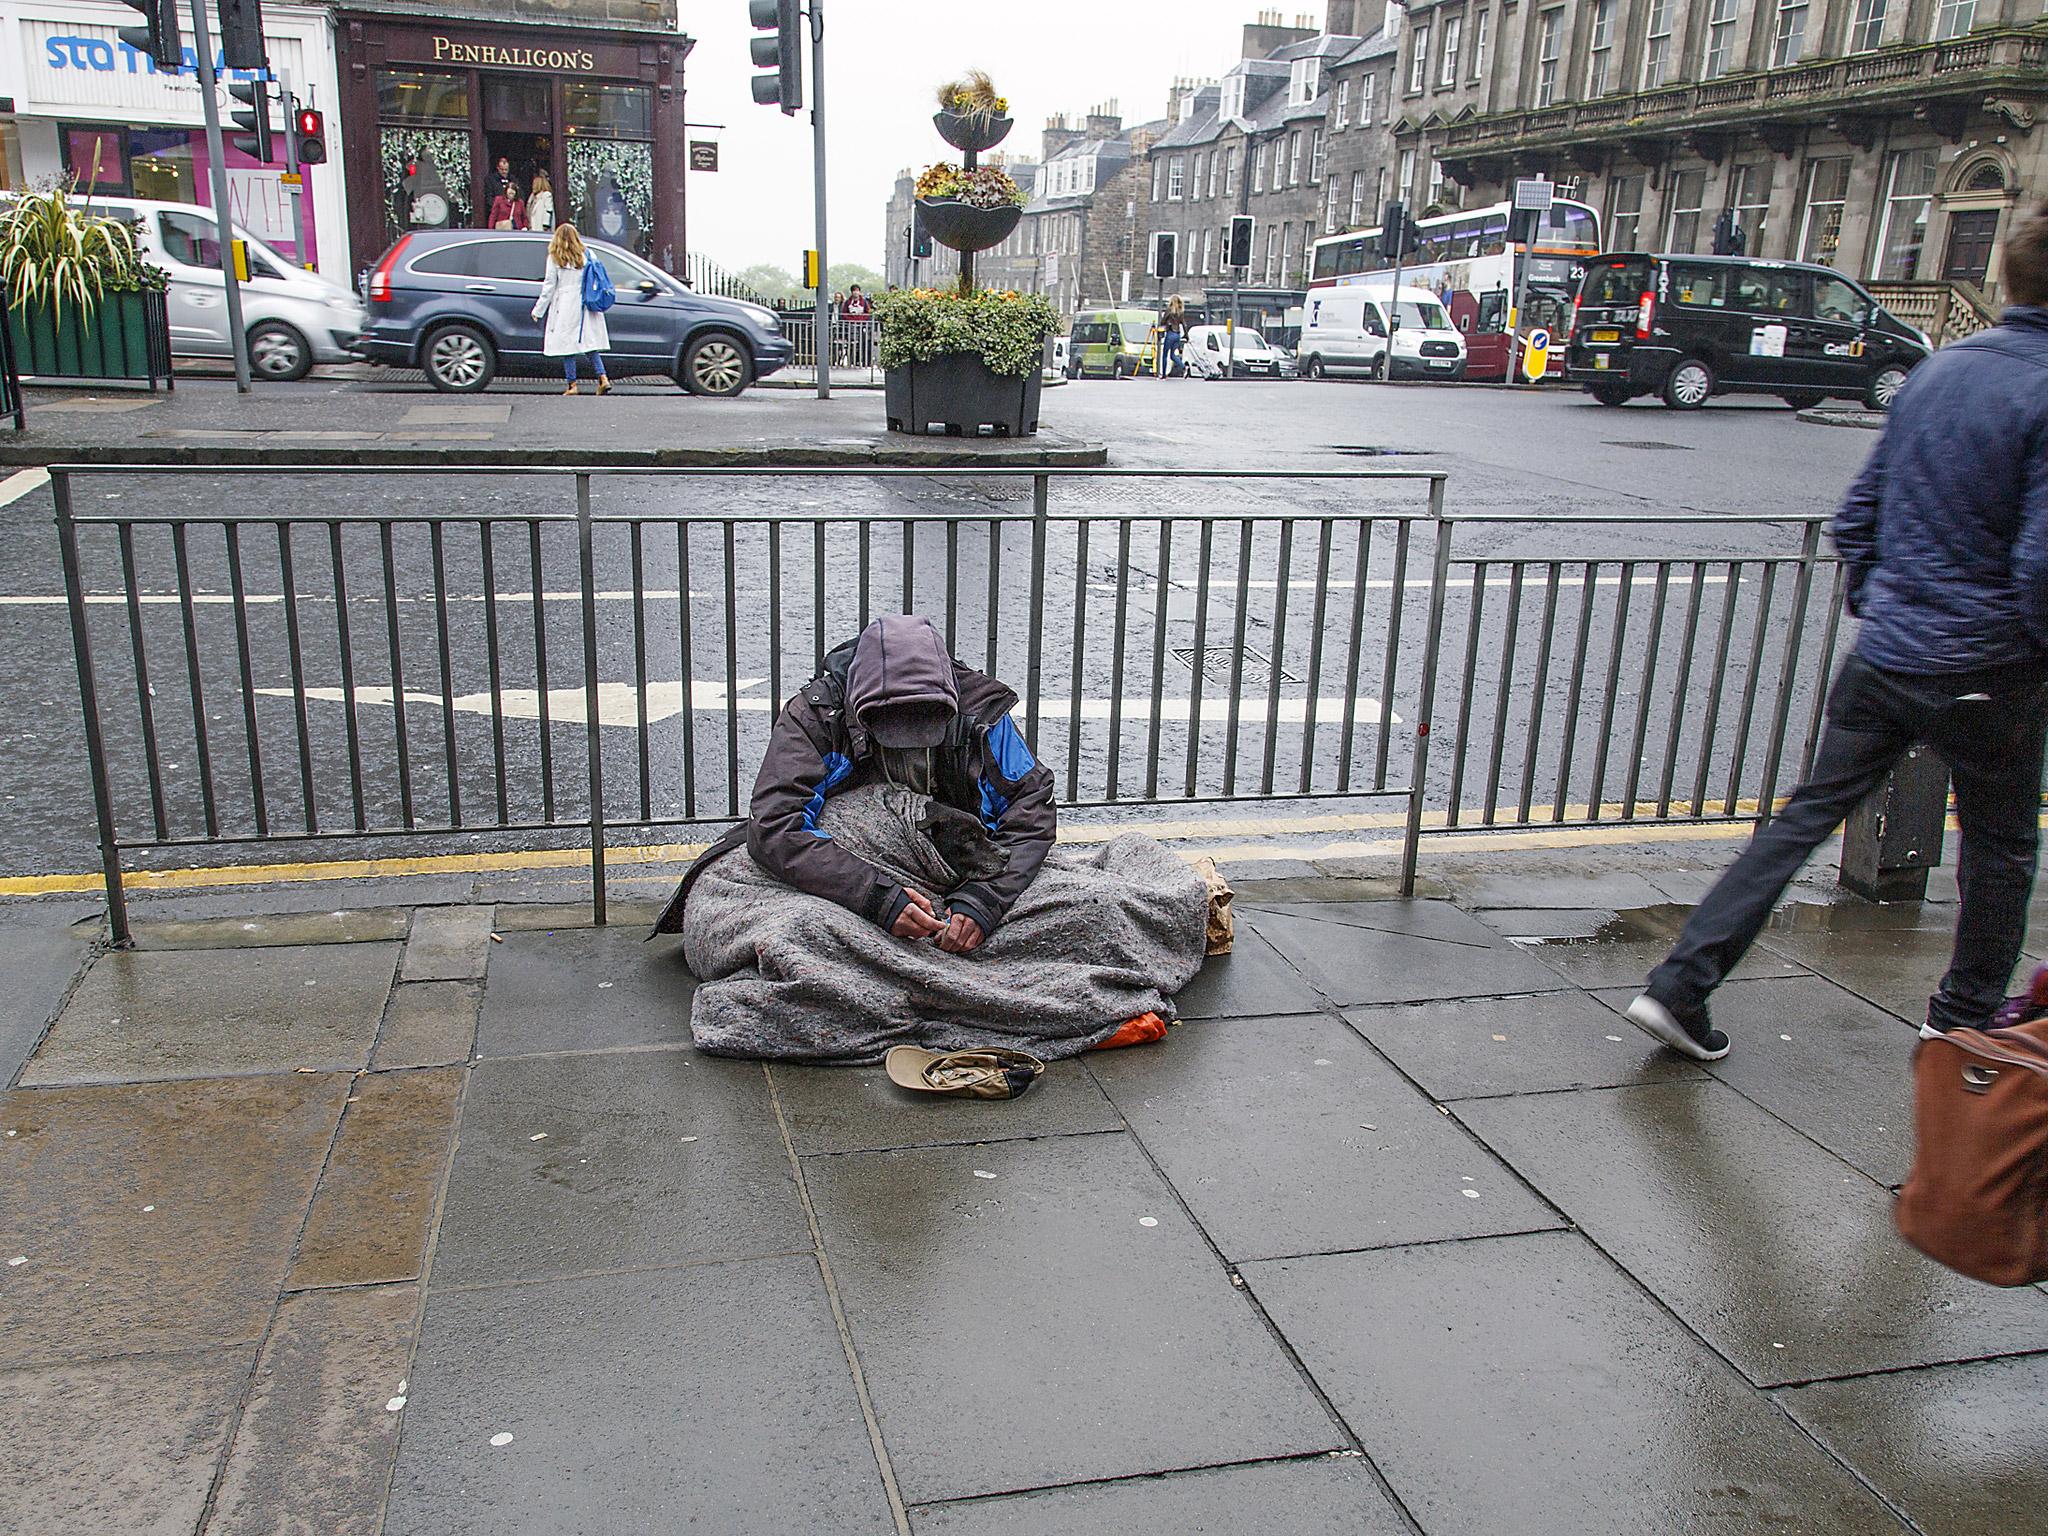 A beggar in Edinburgh city centre. Most local authorities discourage people from giving money to those on the street, and instead advise donating to homeless charities